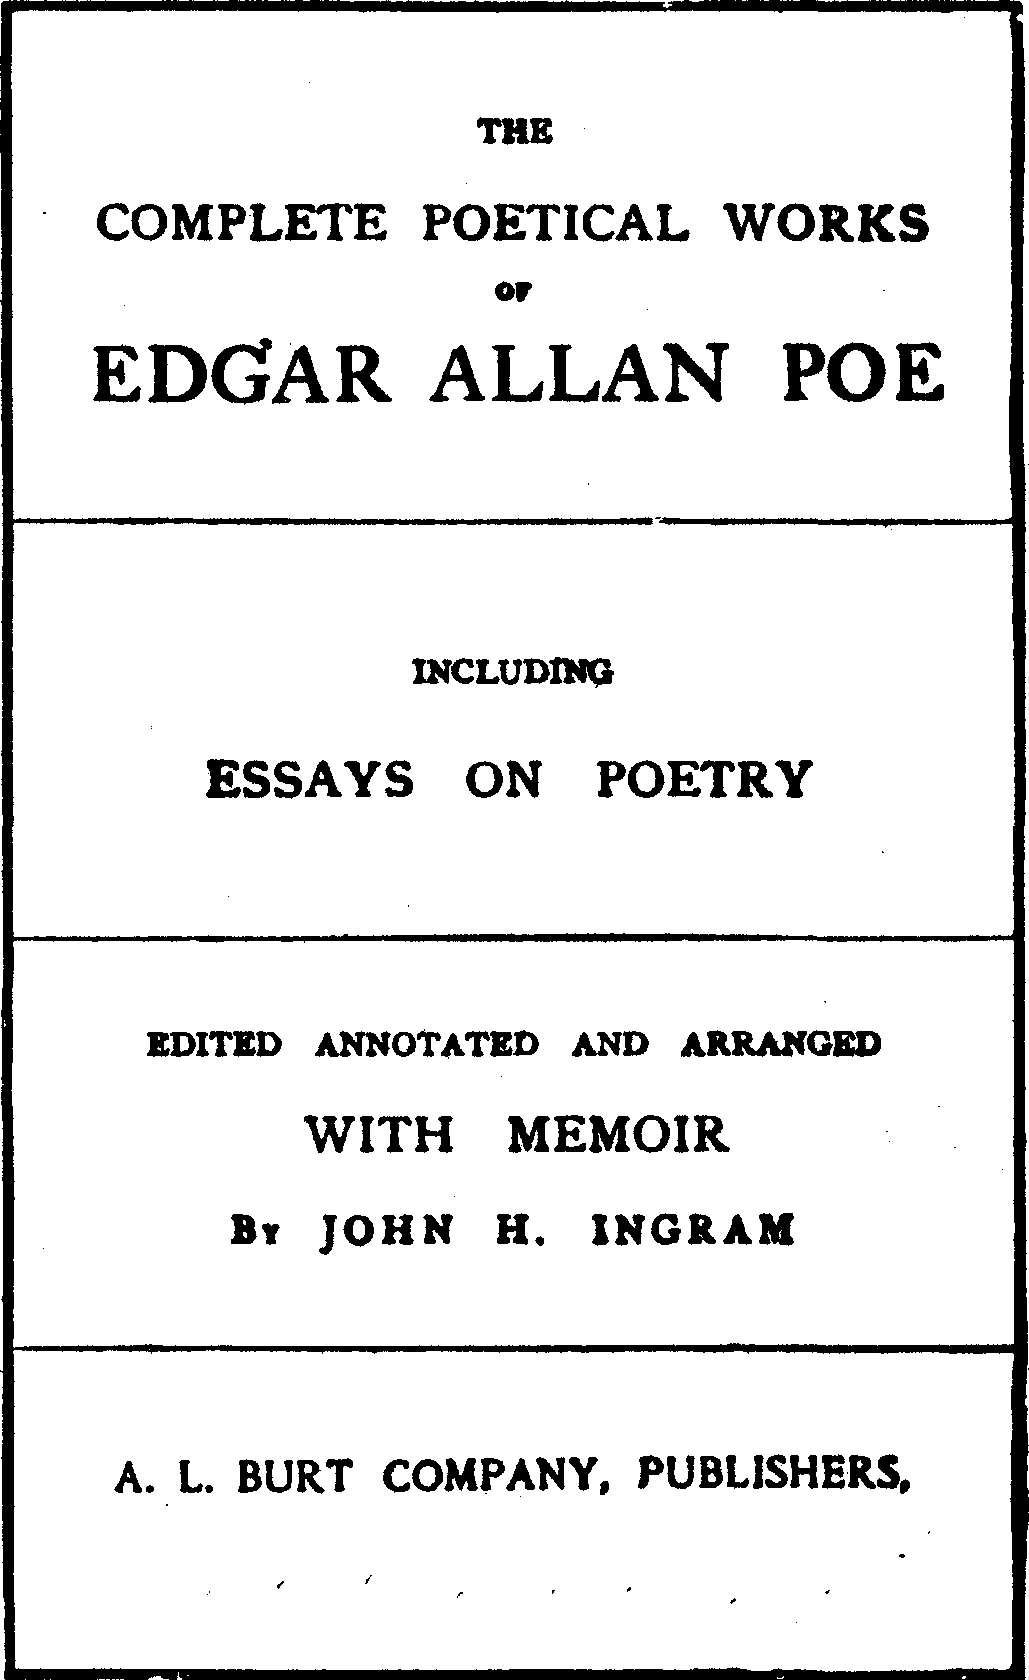 Edgar Allan Poe (Author of The Complete Stories and Poems)